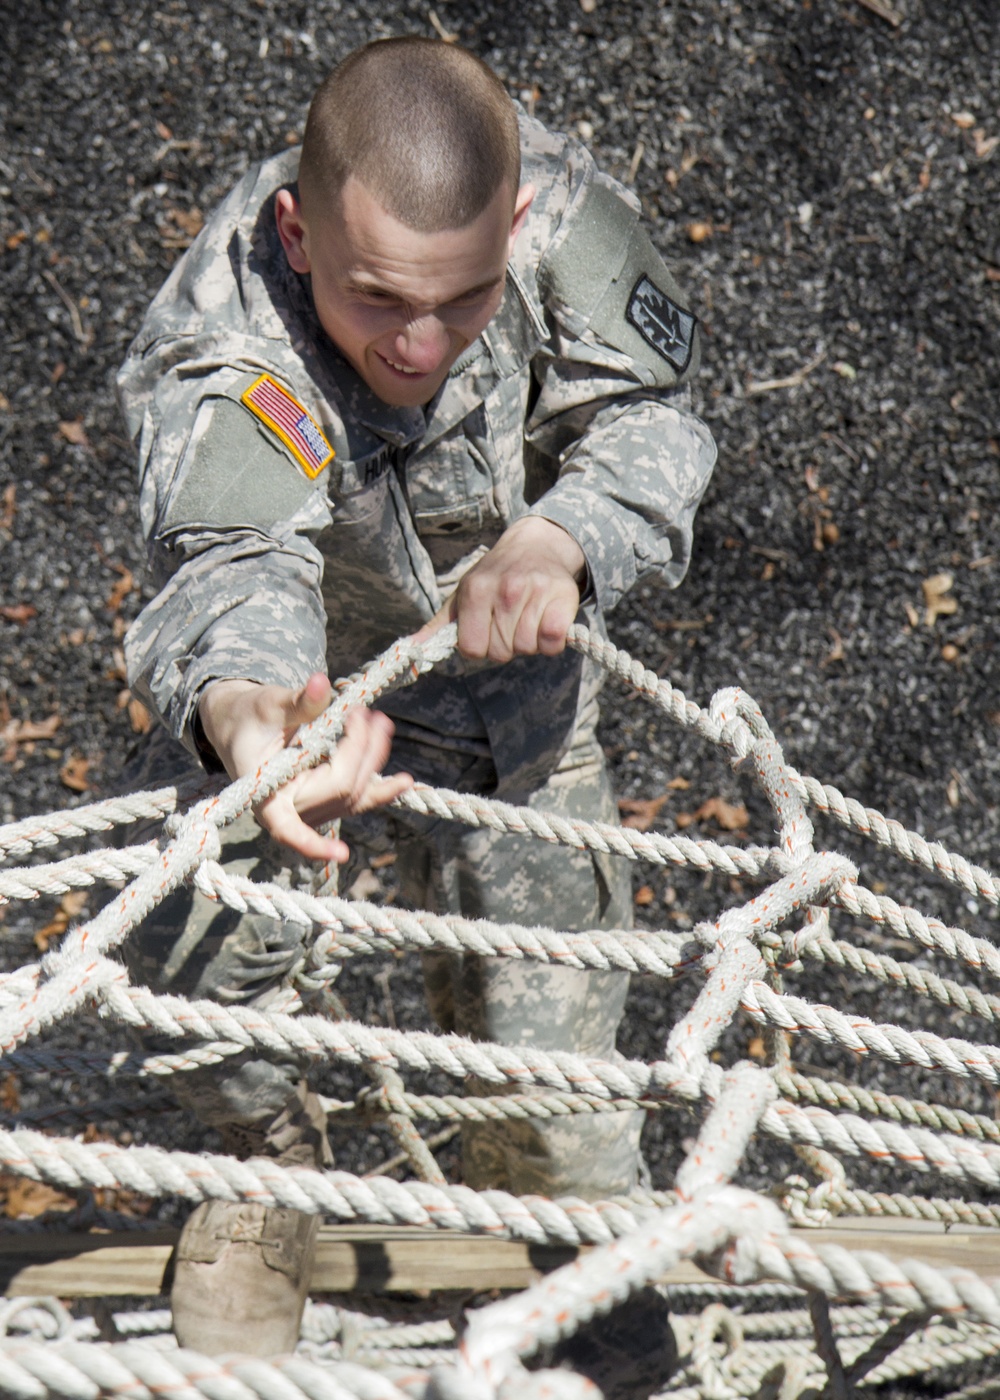 200th MPCOM Soldiers compete in the command's 2015 Best Warrior Competition